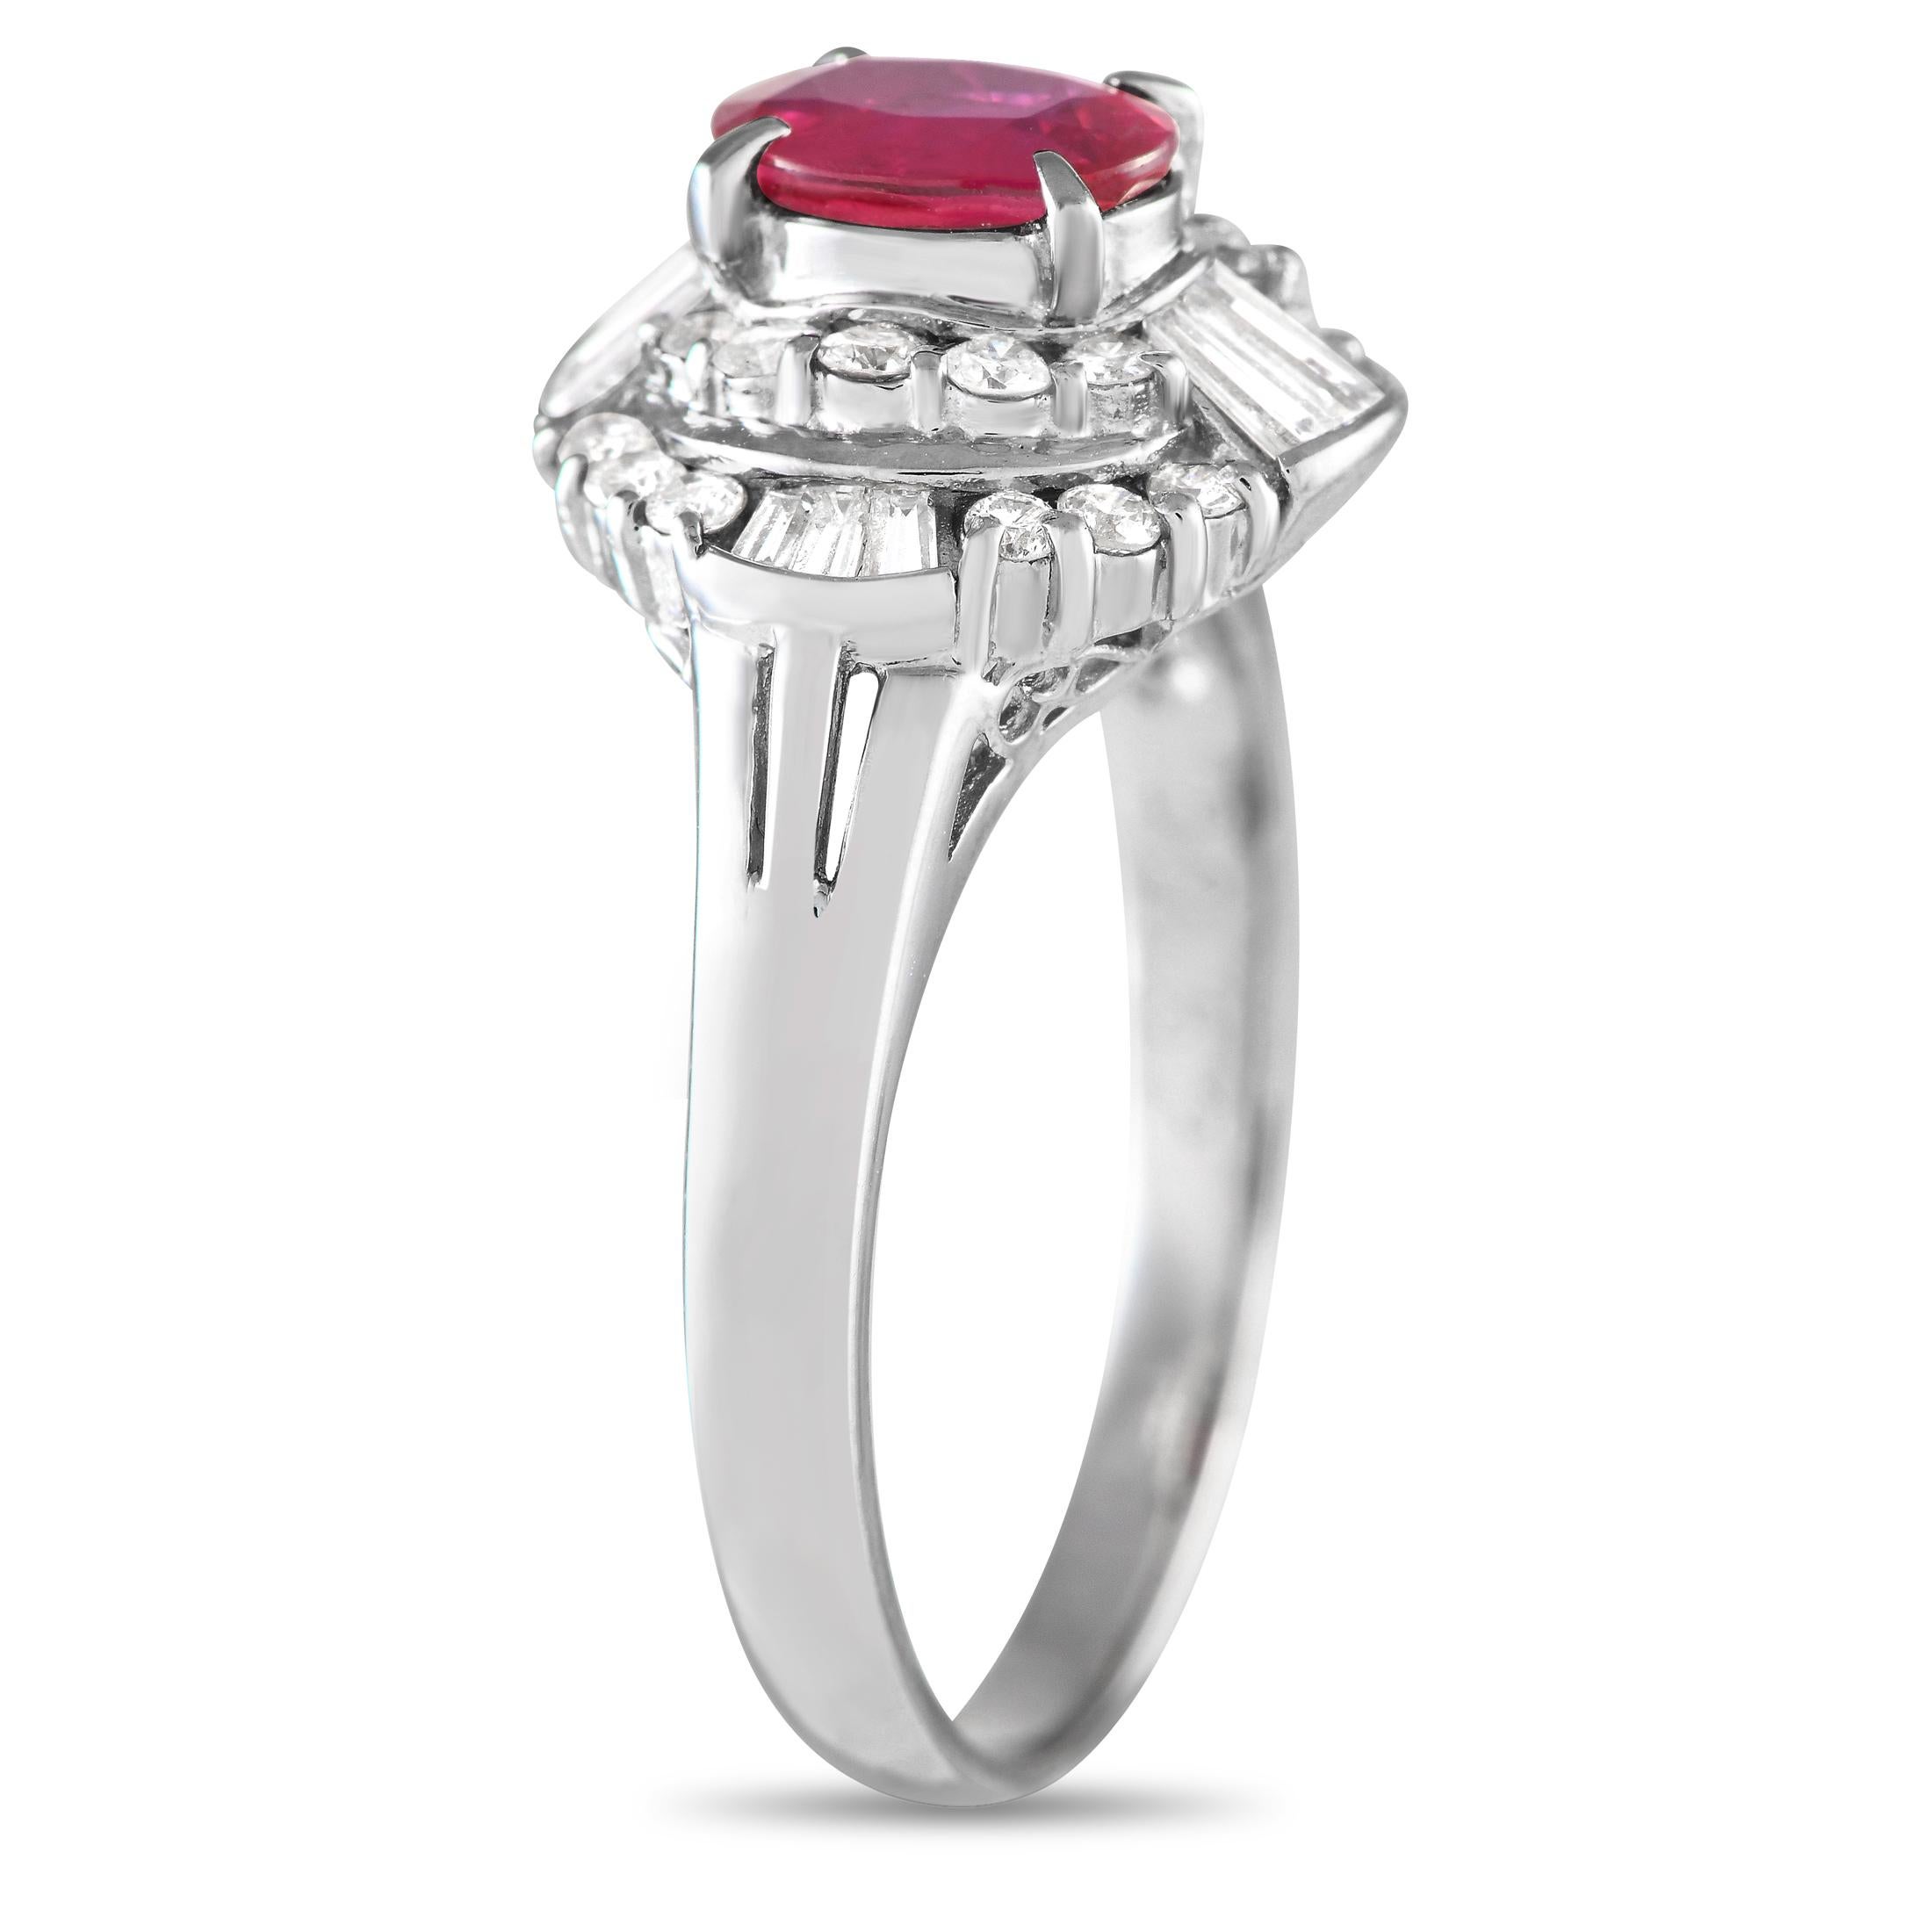 Angles and curves make up the alluring beauty of this diamond and ruby ring. Its platinum band features daintily split shoulders that support a stepped halo with tapered baguette and round diamonds. Taking centerstage is a 0.71 ct oval ruby secured